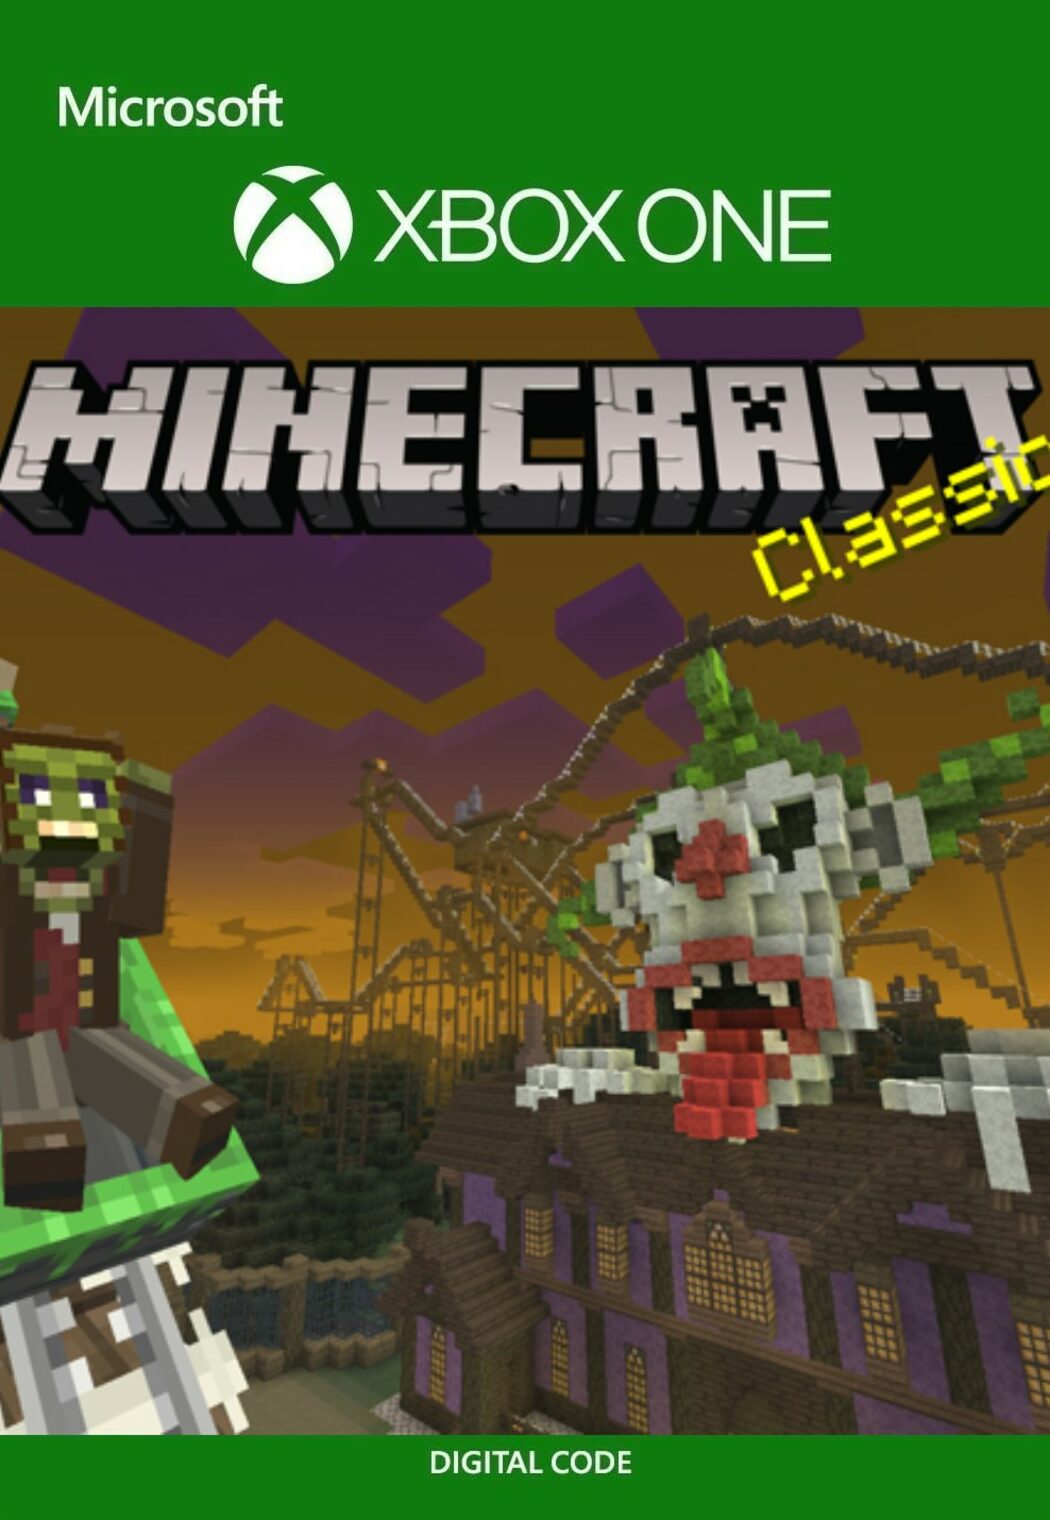 images./games/minecraft-classic/cove